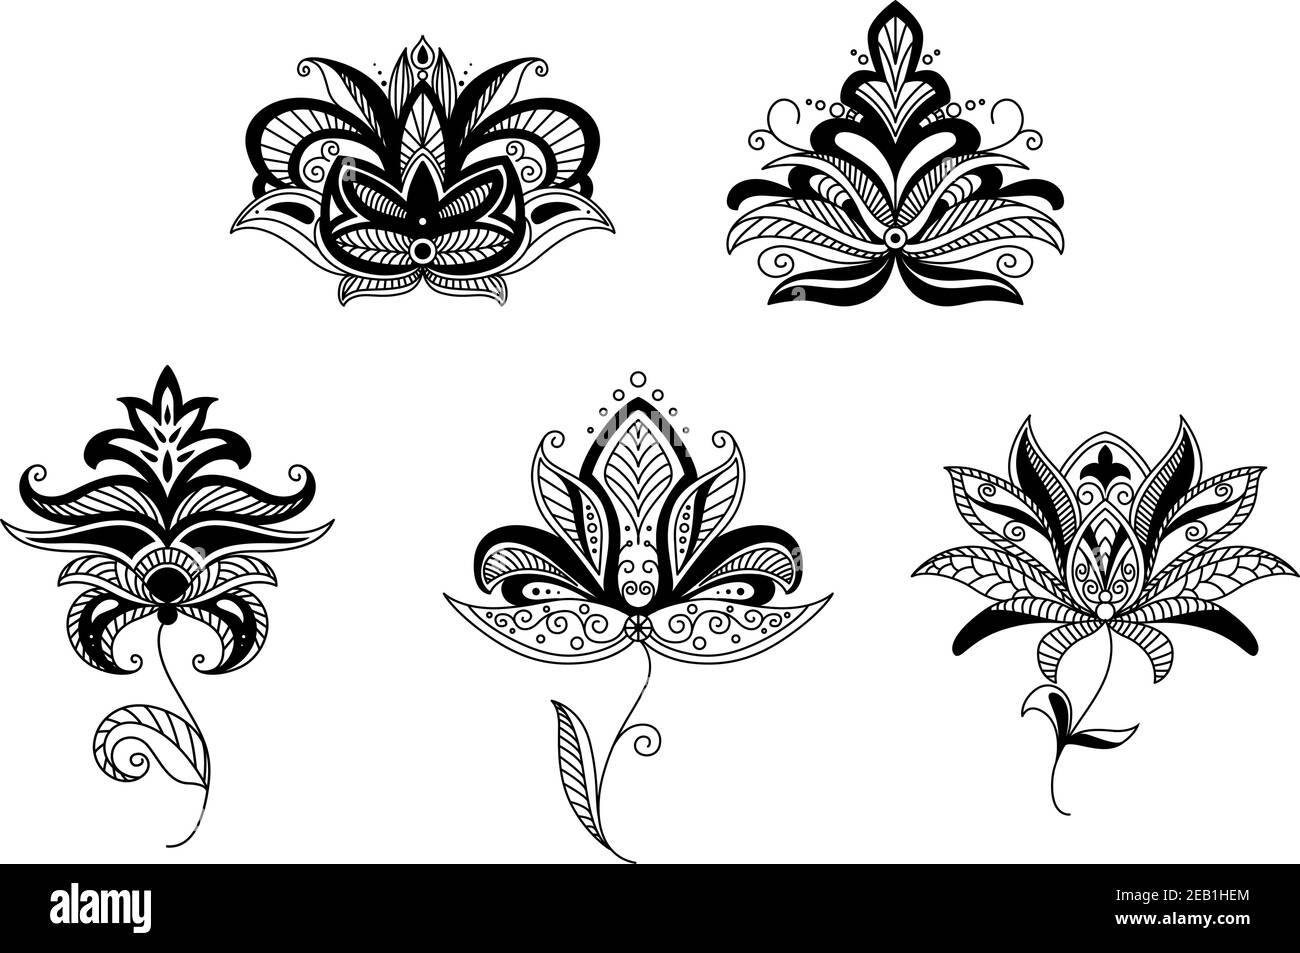 Vintage persian and indian paisley floral elements or patterns in silhouette style Stock Vector